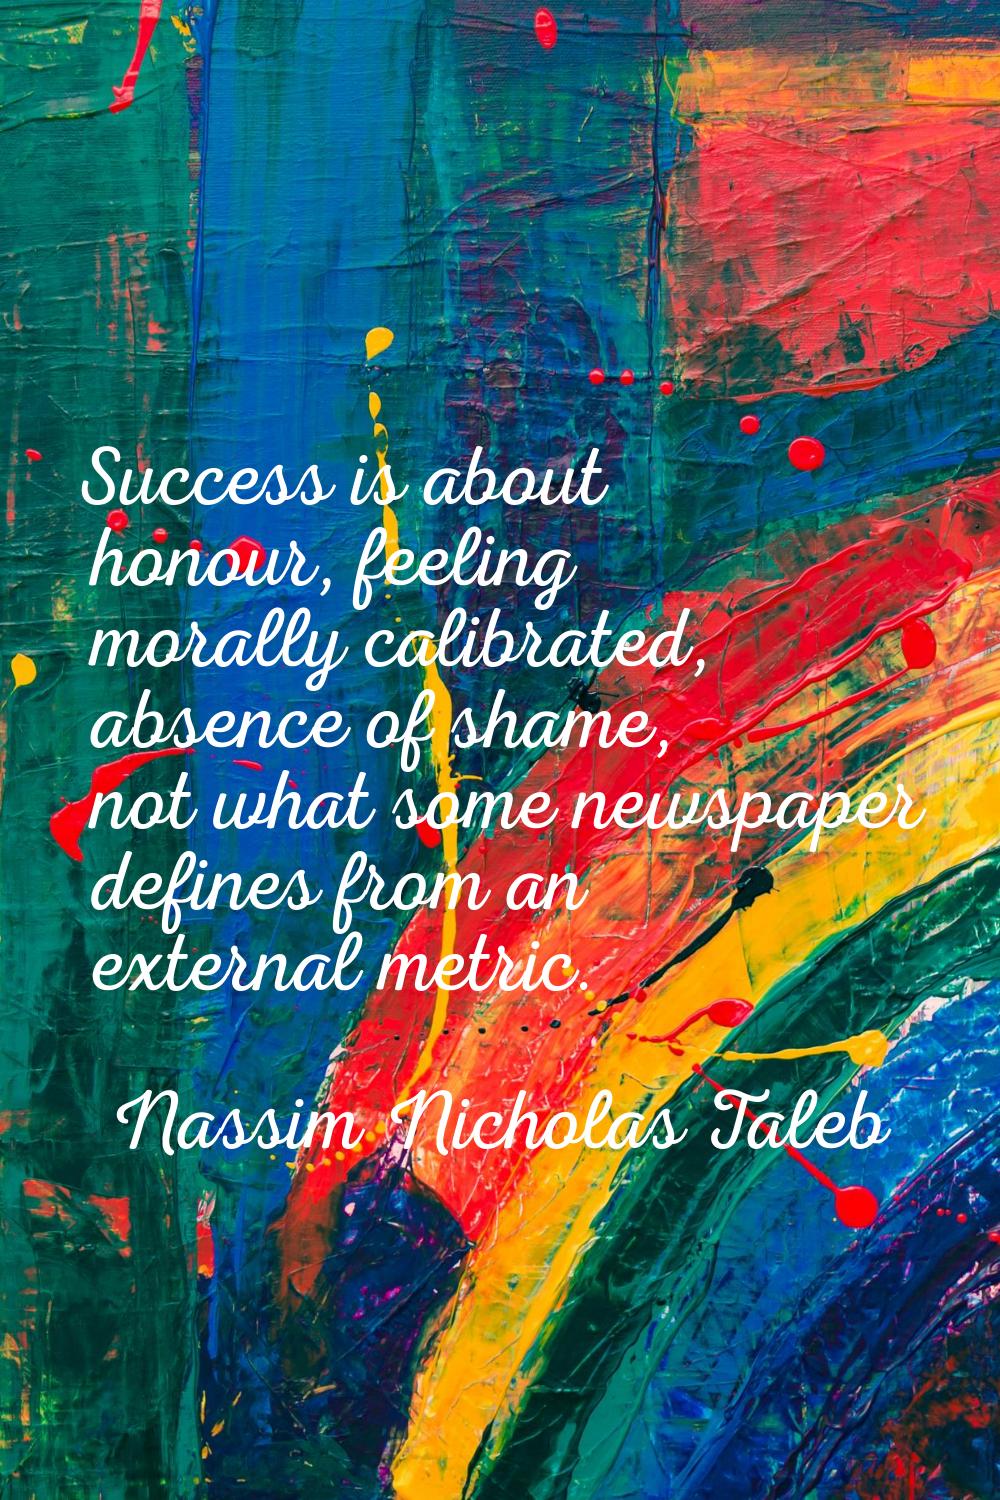 Success is about honour, feeling morally calibrated, absence of shame, not what some newspaper defi